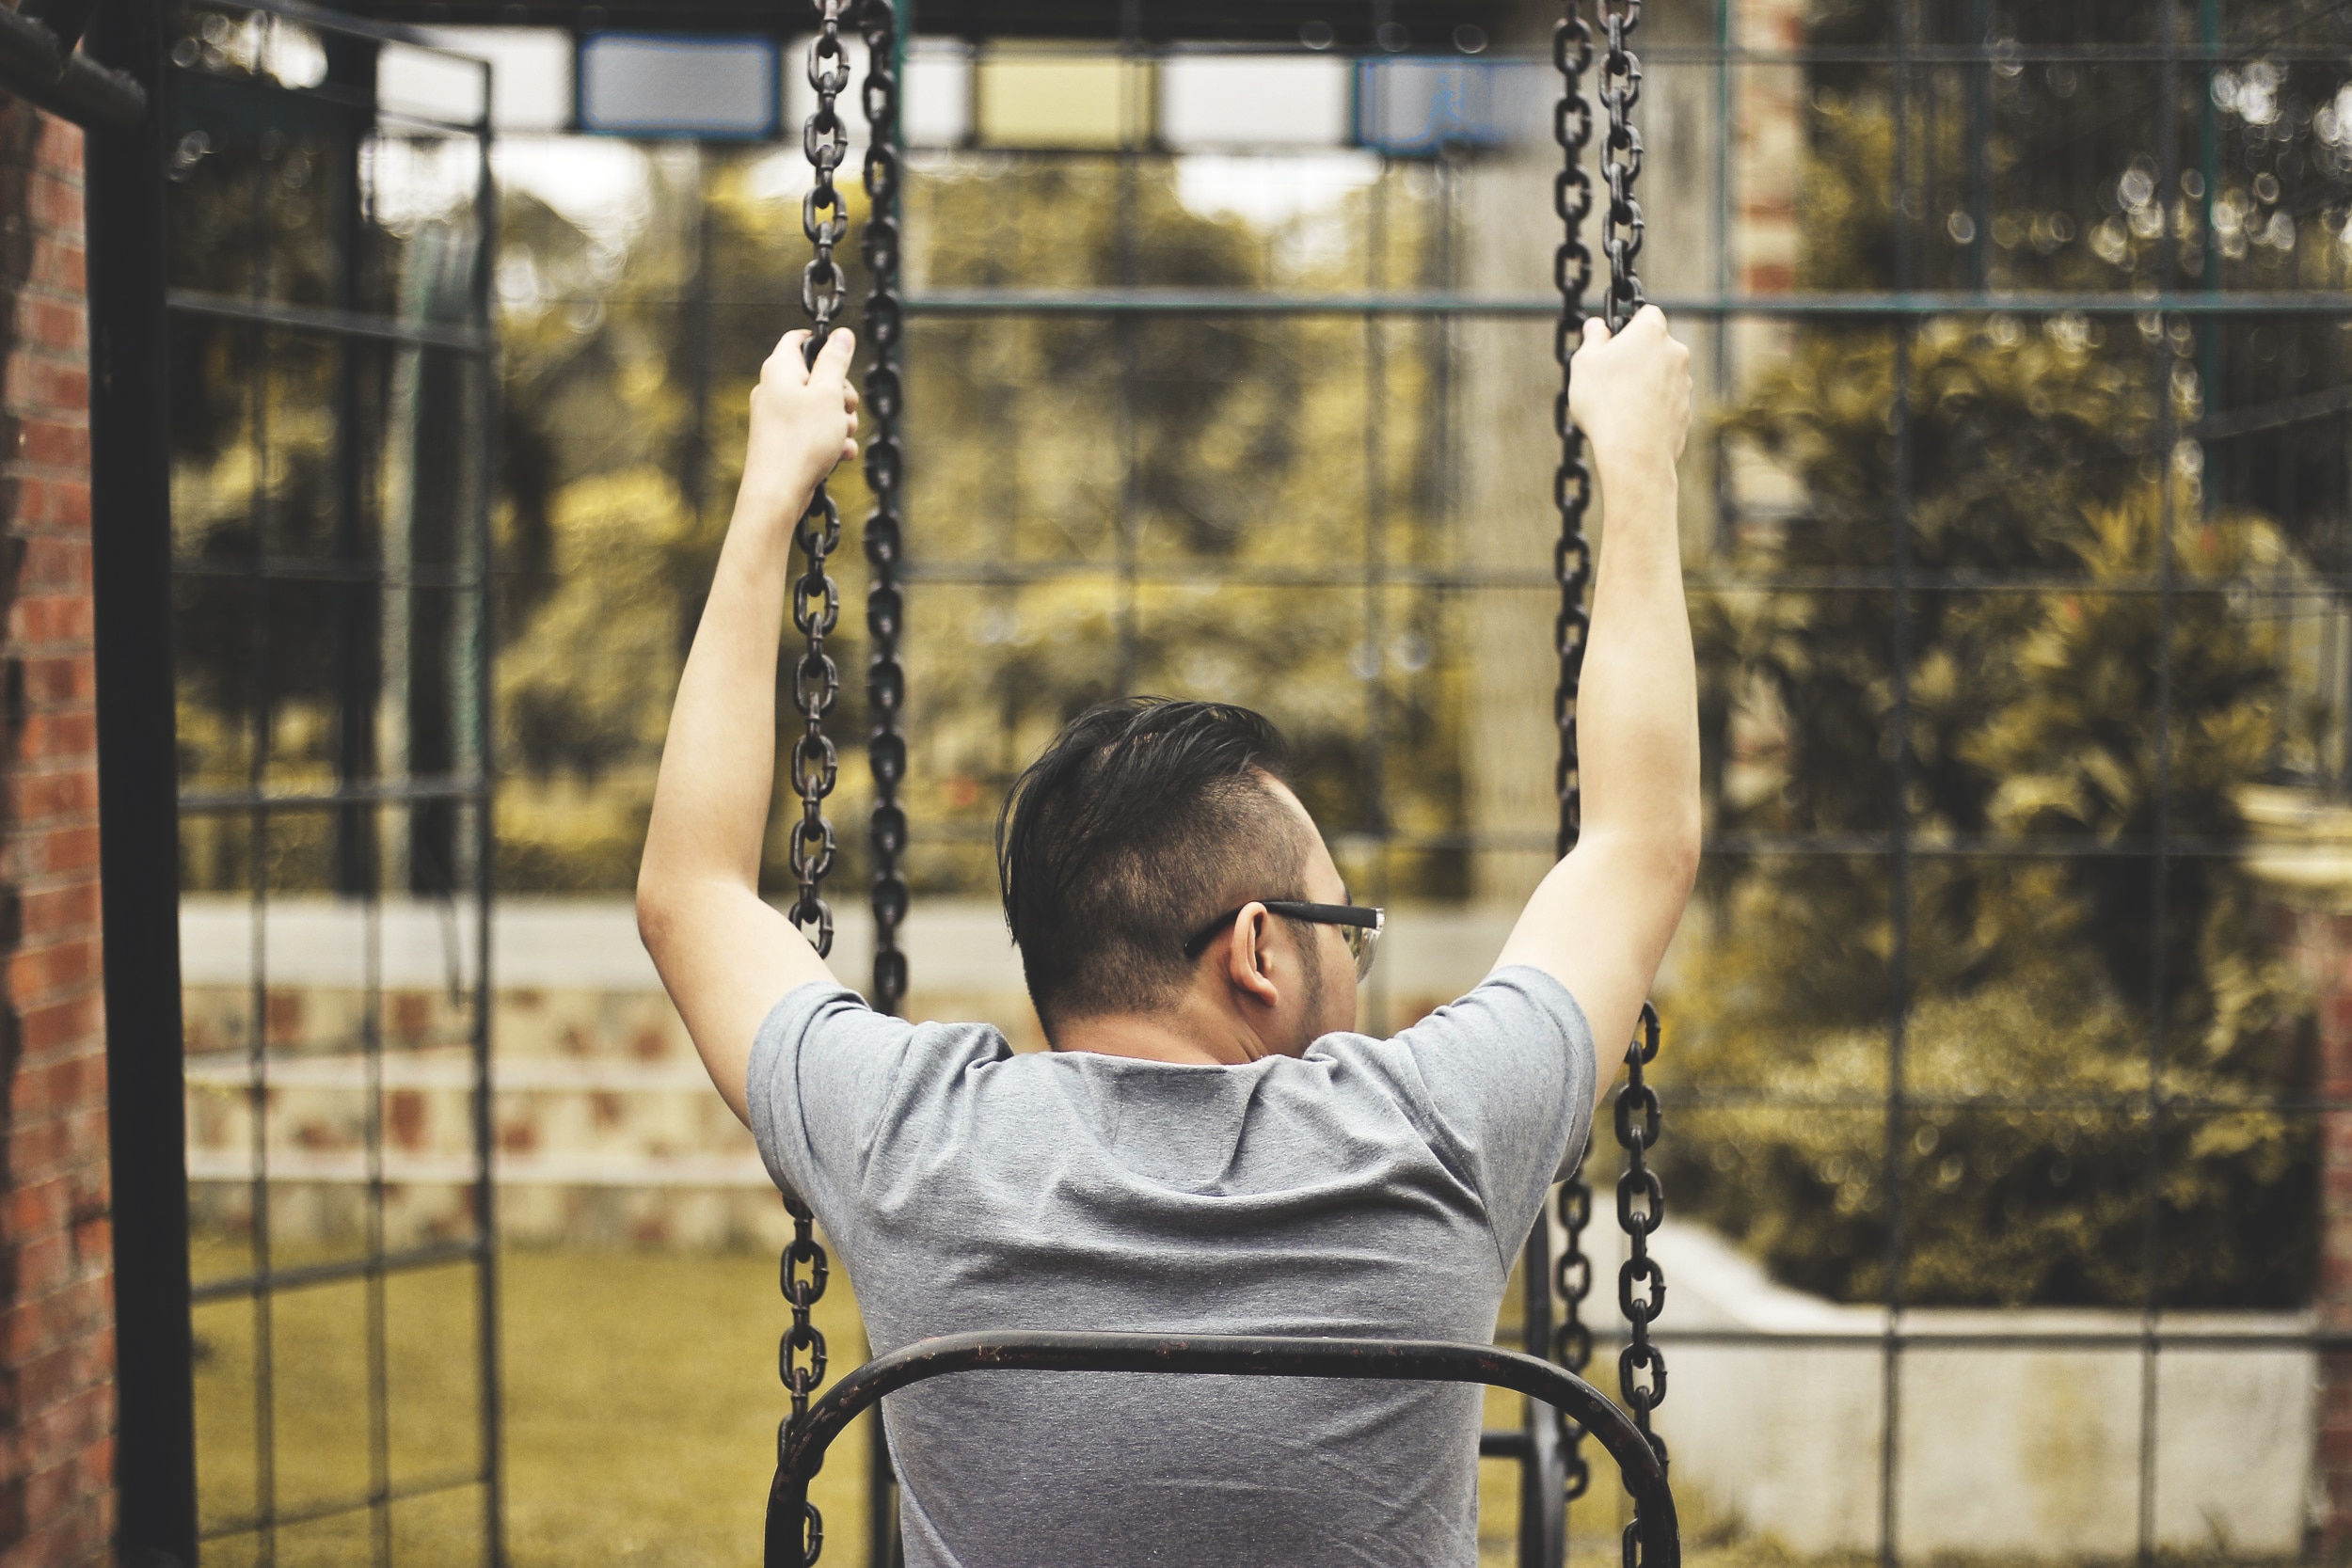 man sitting in swing during day time